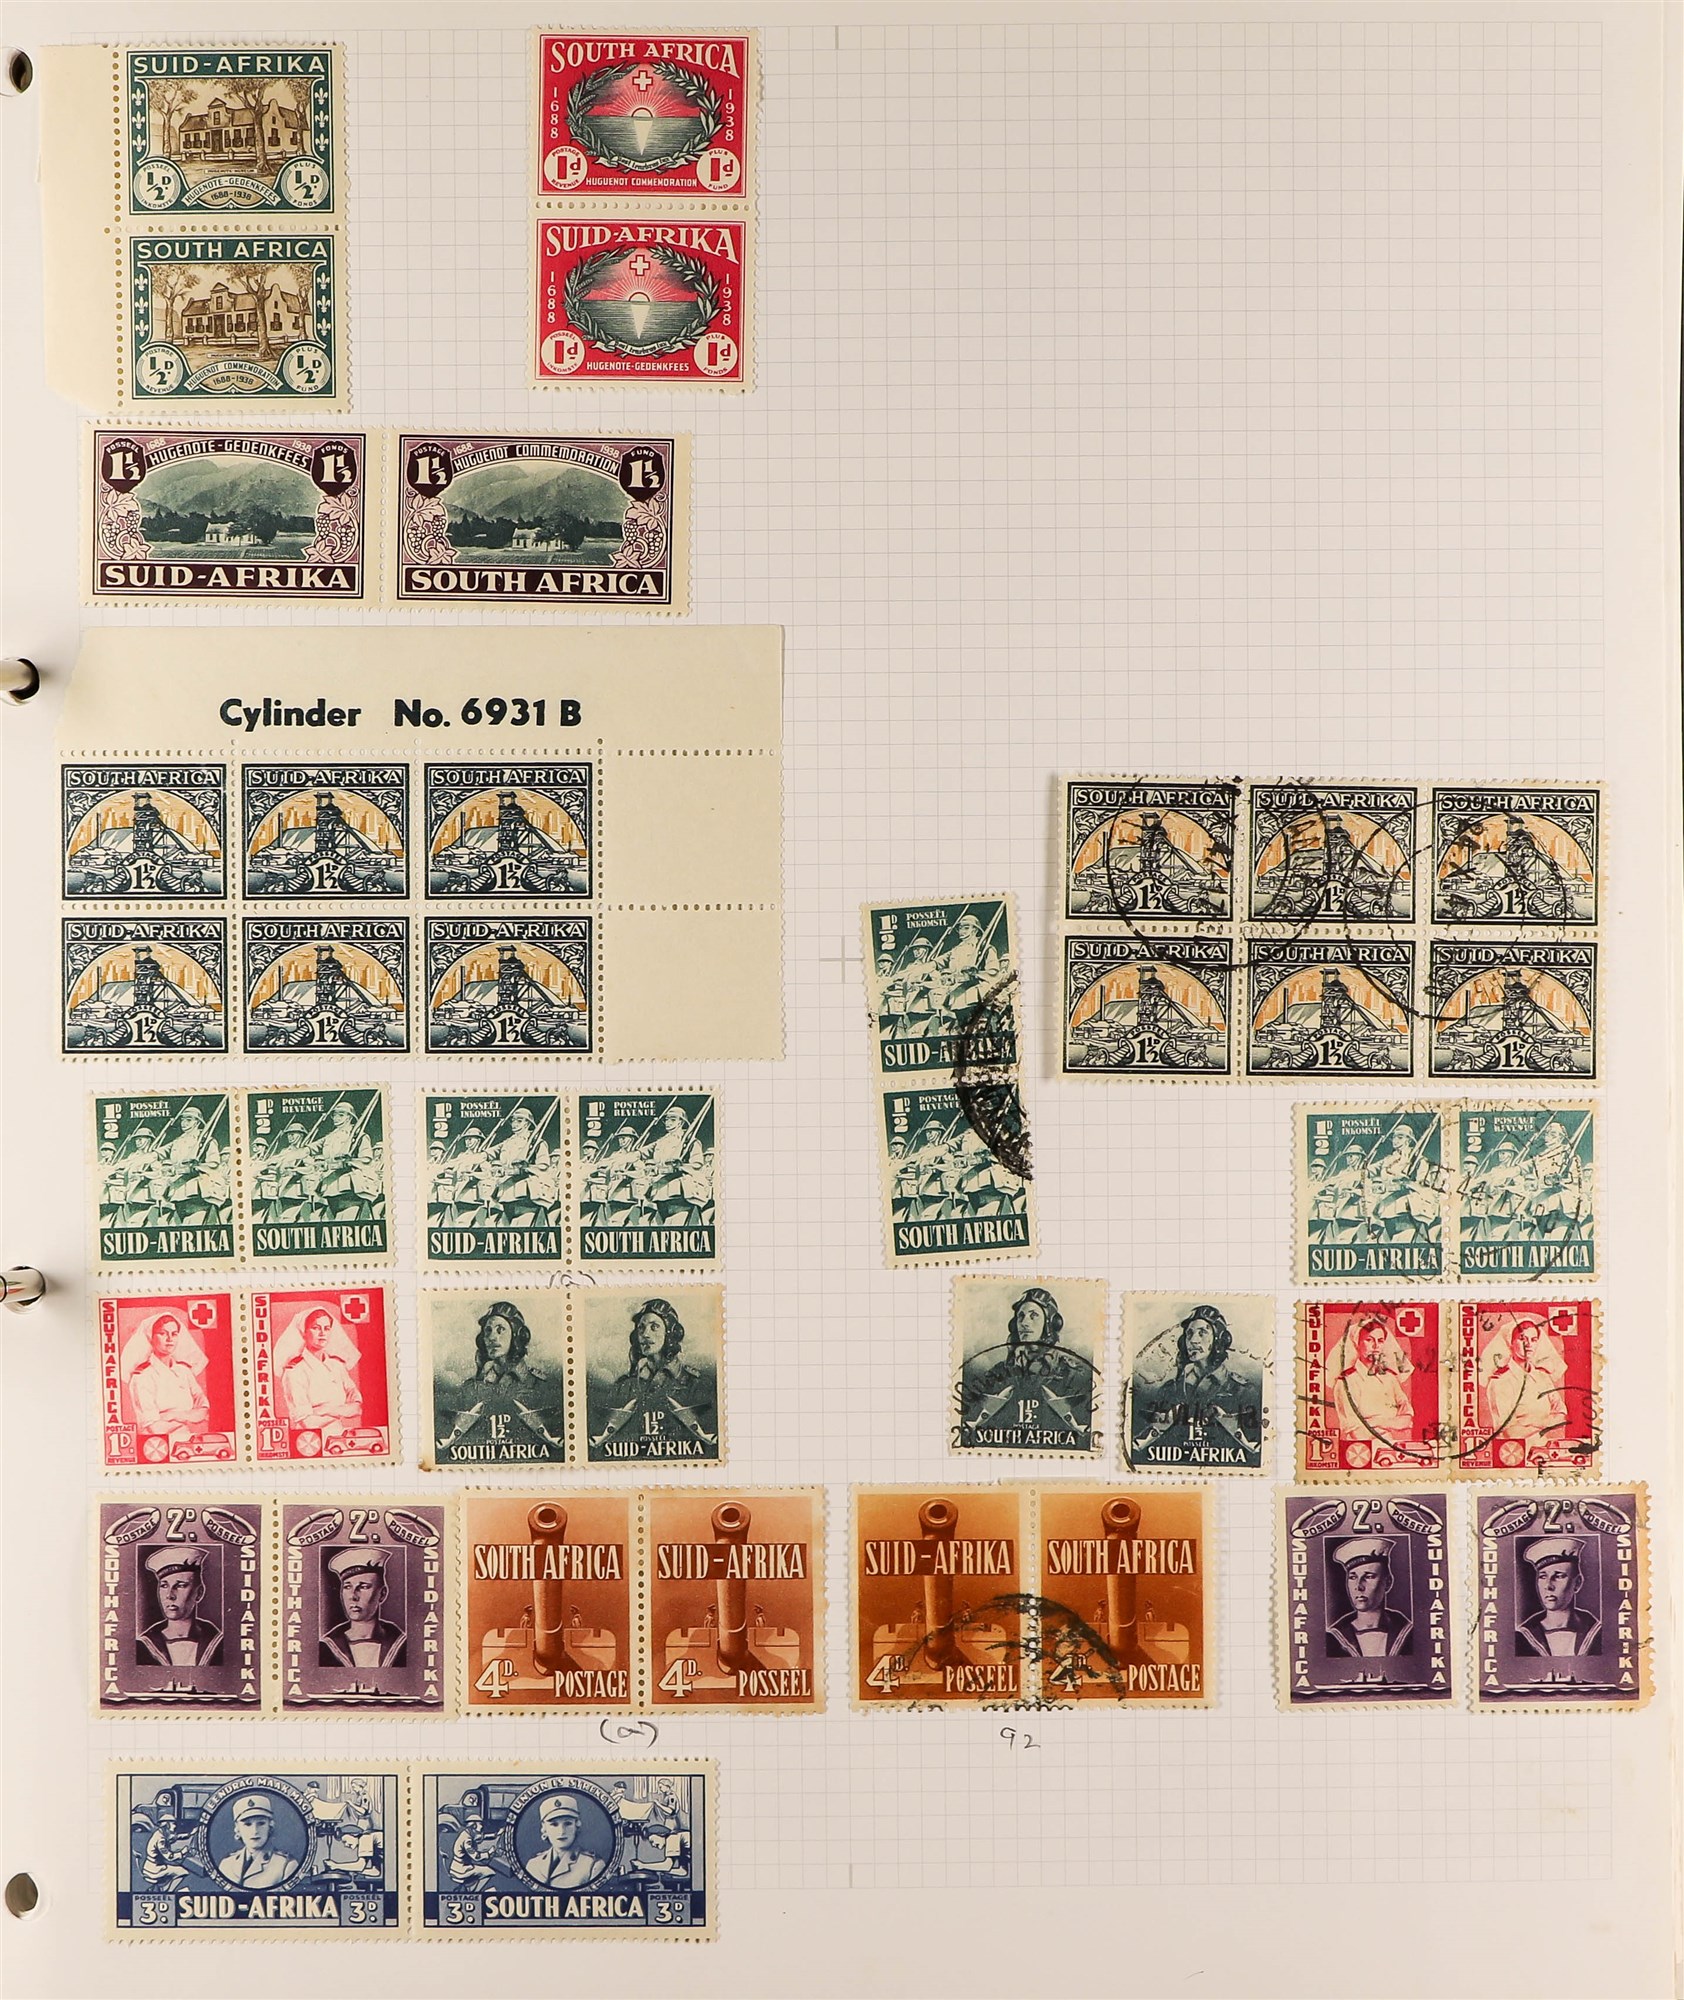 SOUTH AFRICA 1910 - 2010 COLLECTION of mint & used stamps in album, many high values, sets (2200+ - Image 8 of 17